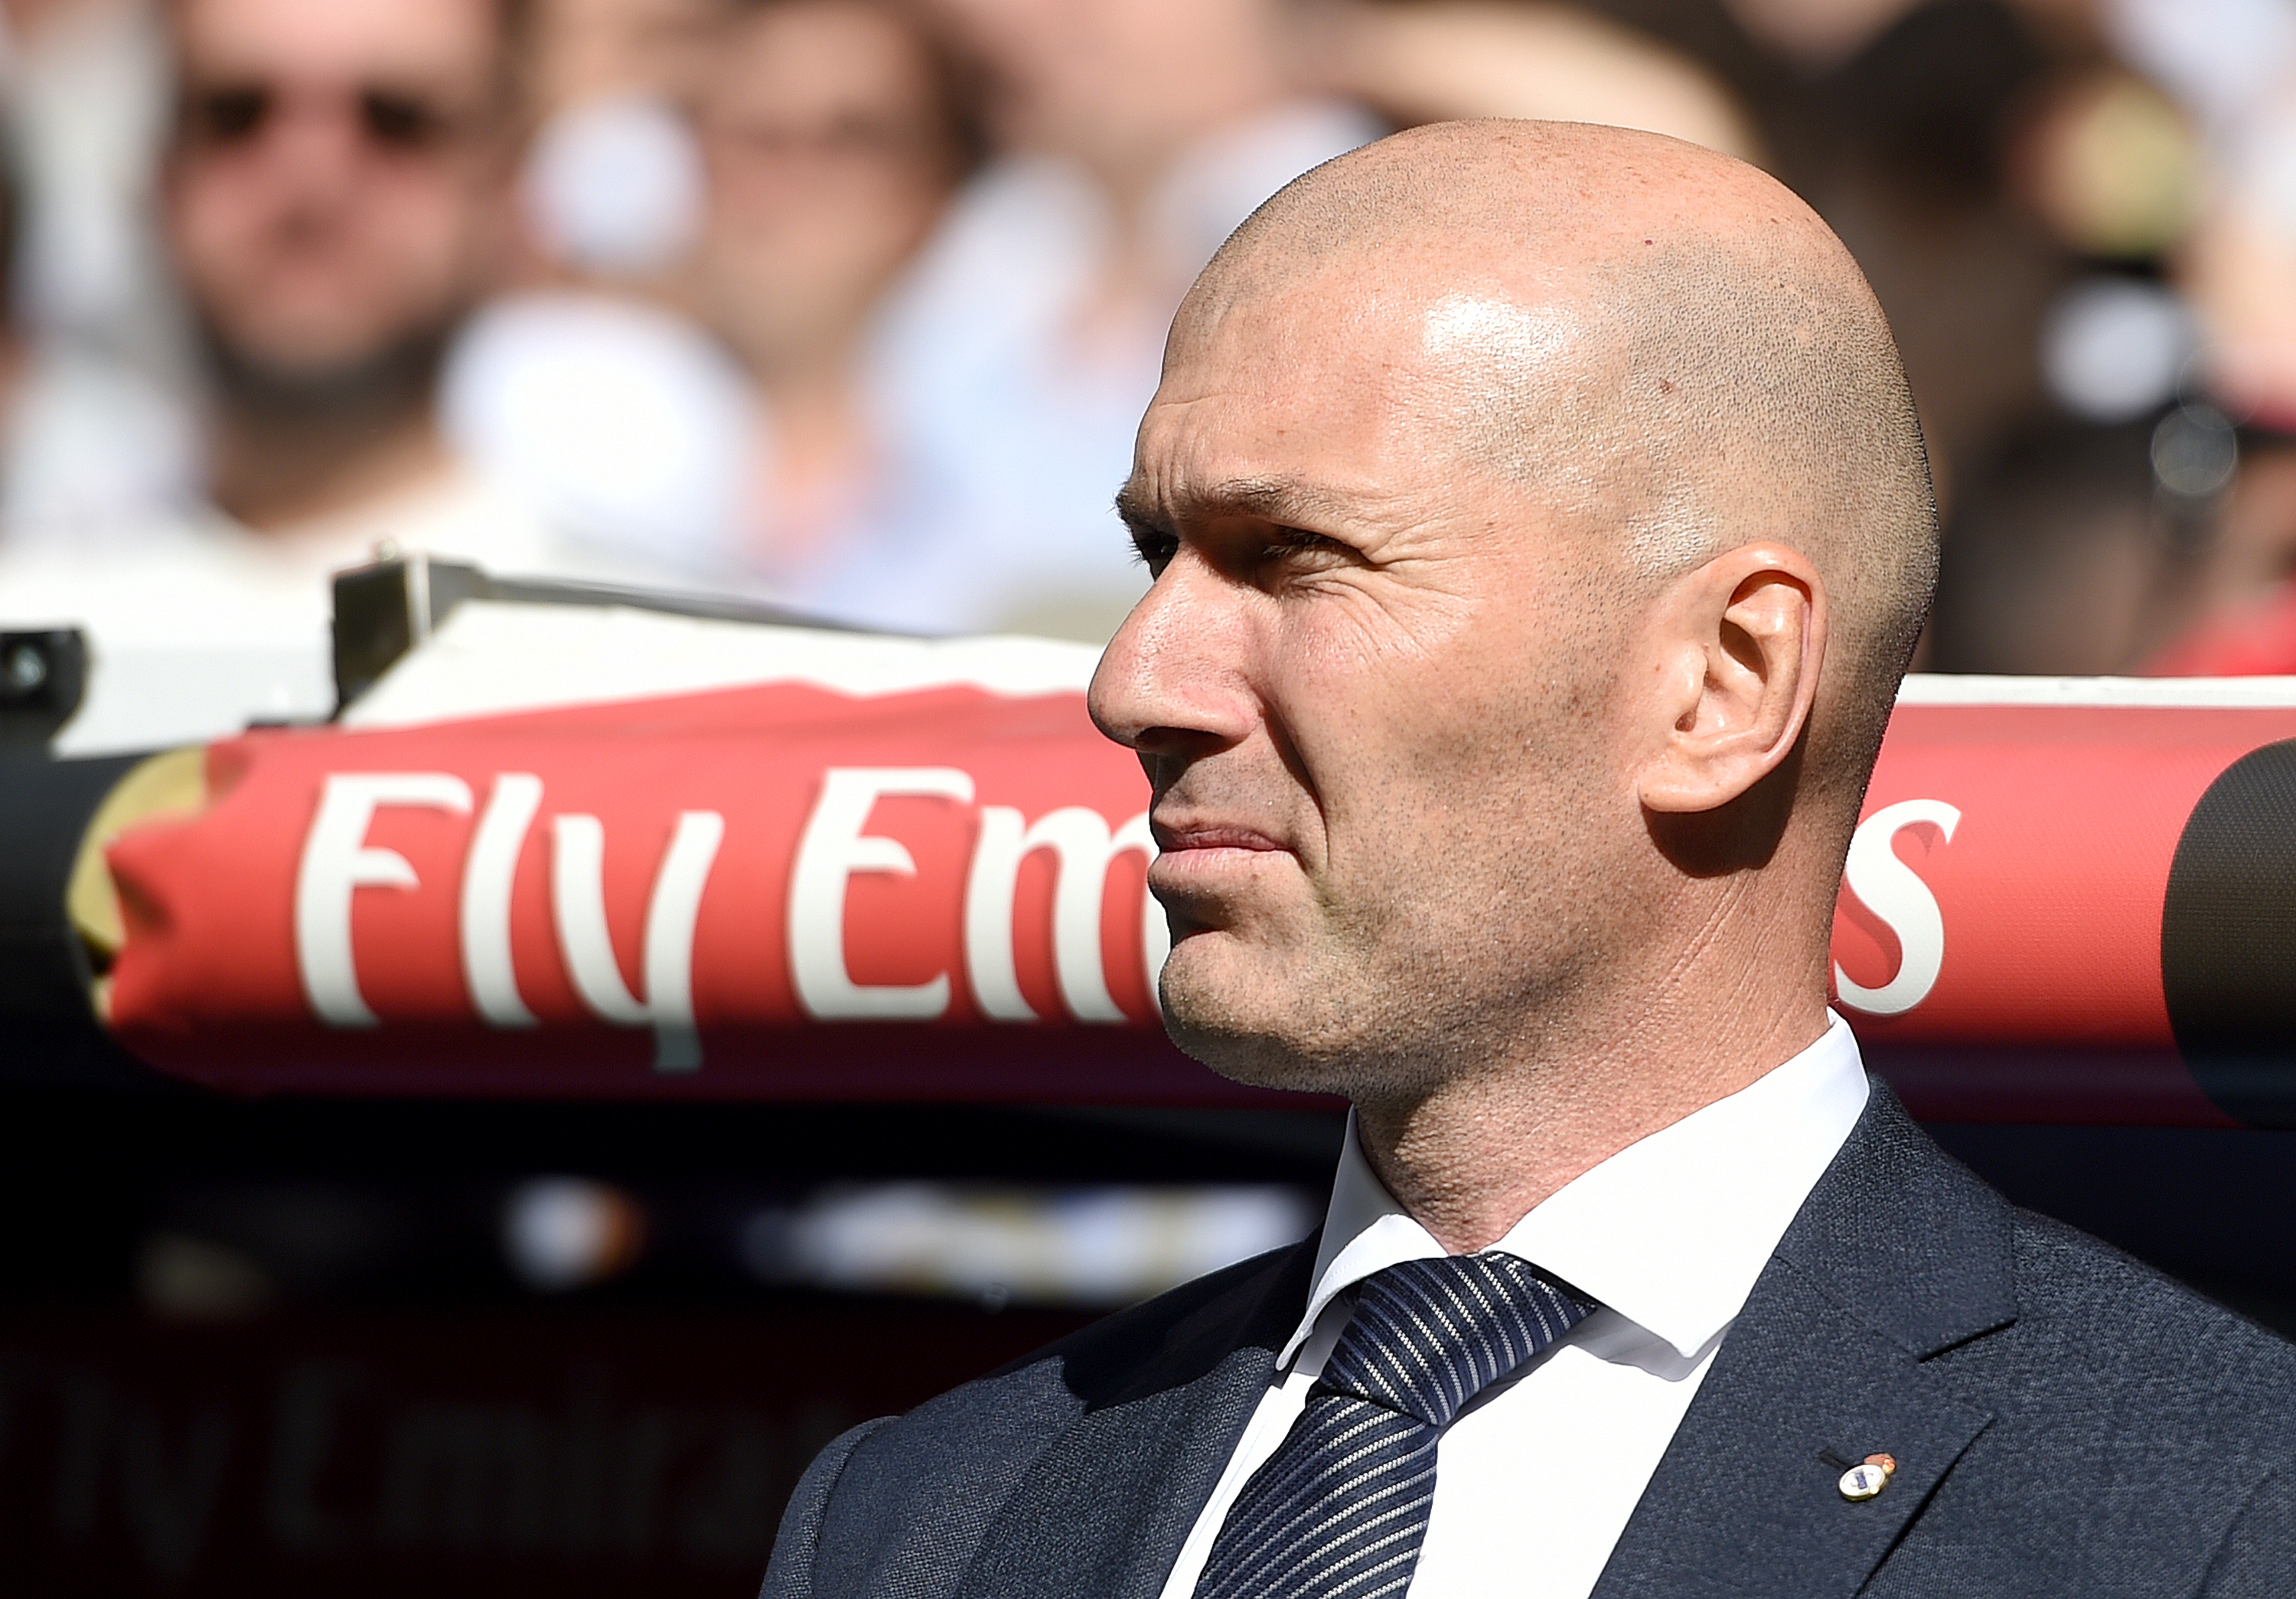 Zidane's return to the Madrid dugout could attract many top stars to the Bernabeu. (Photo by Denis Doyle/Getty Images)